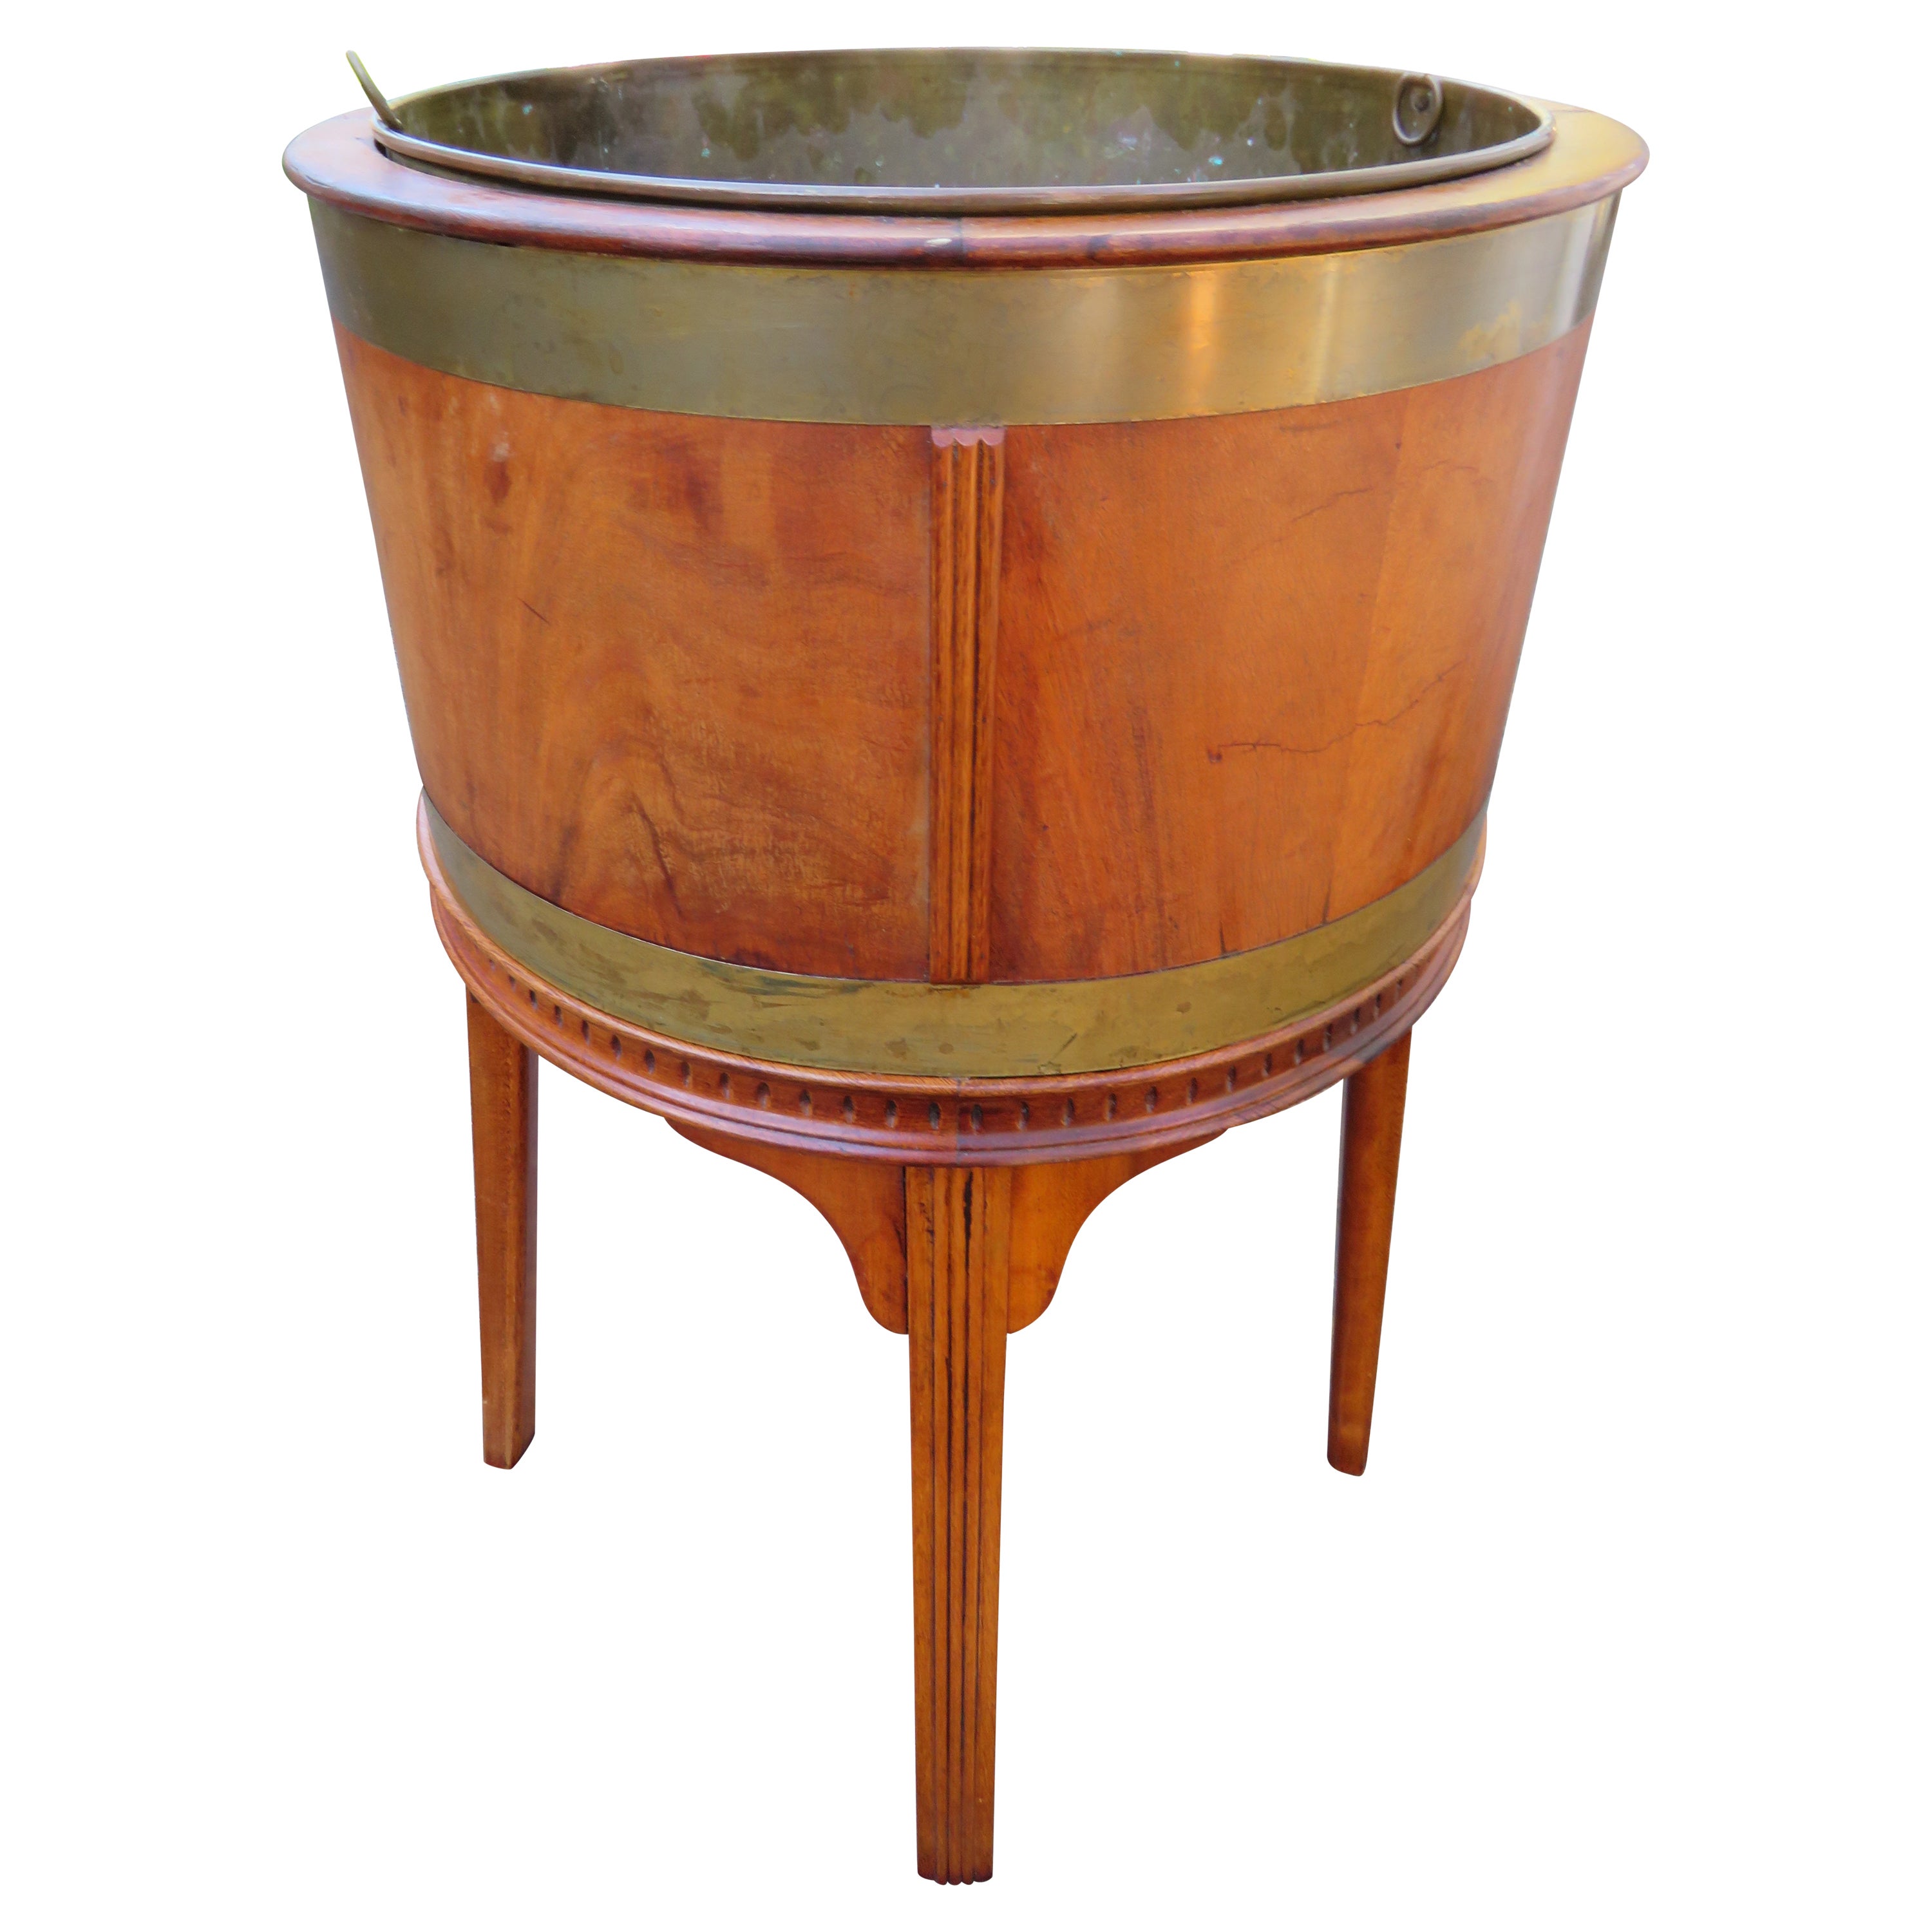 Fabulous George lll Style Brass Banded Cellarate Wine Cooler Planter Brass Liner For Sale